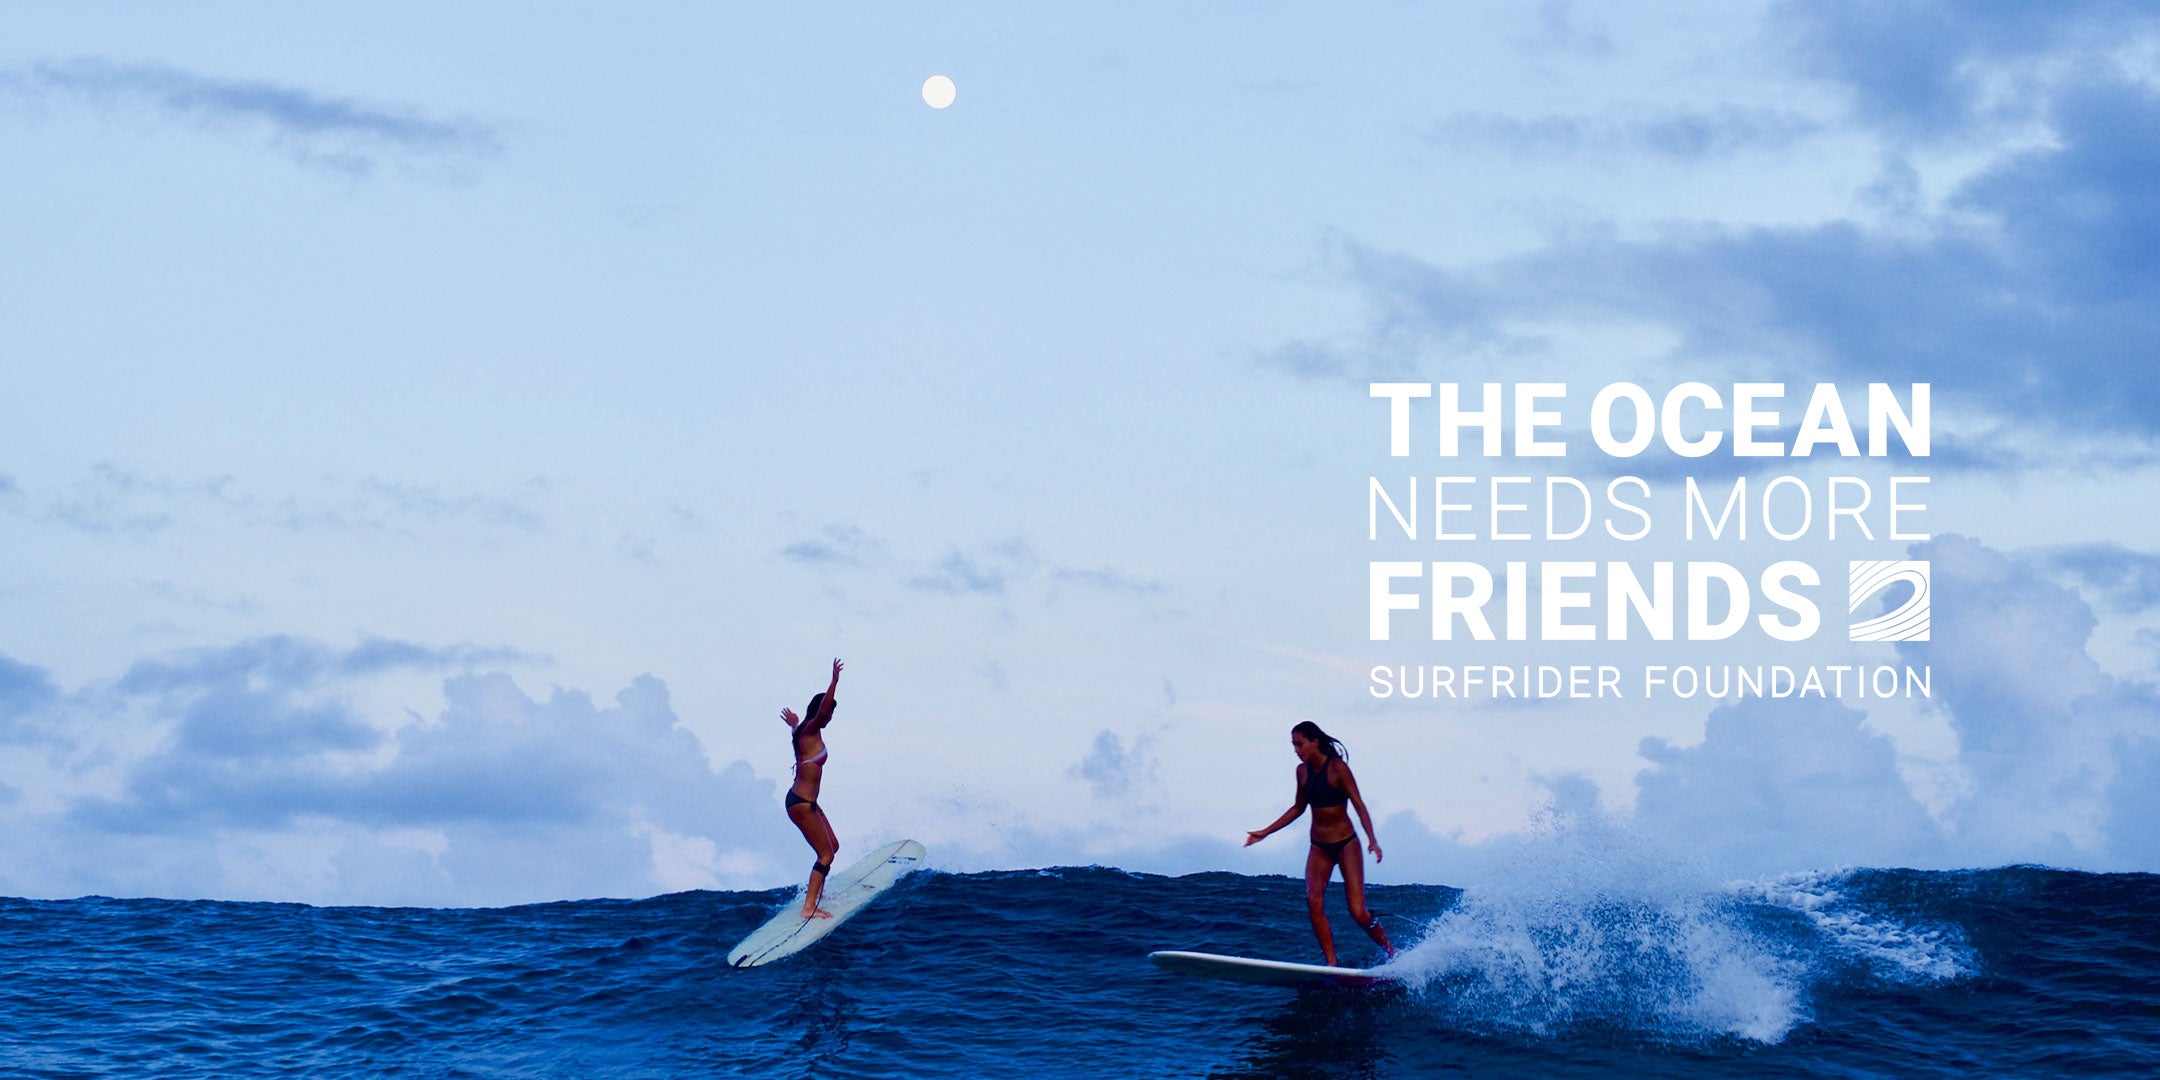 Partnering with Surfrider Foundation